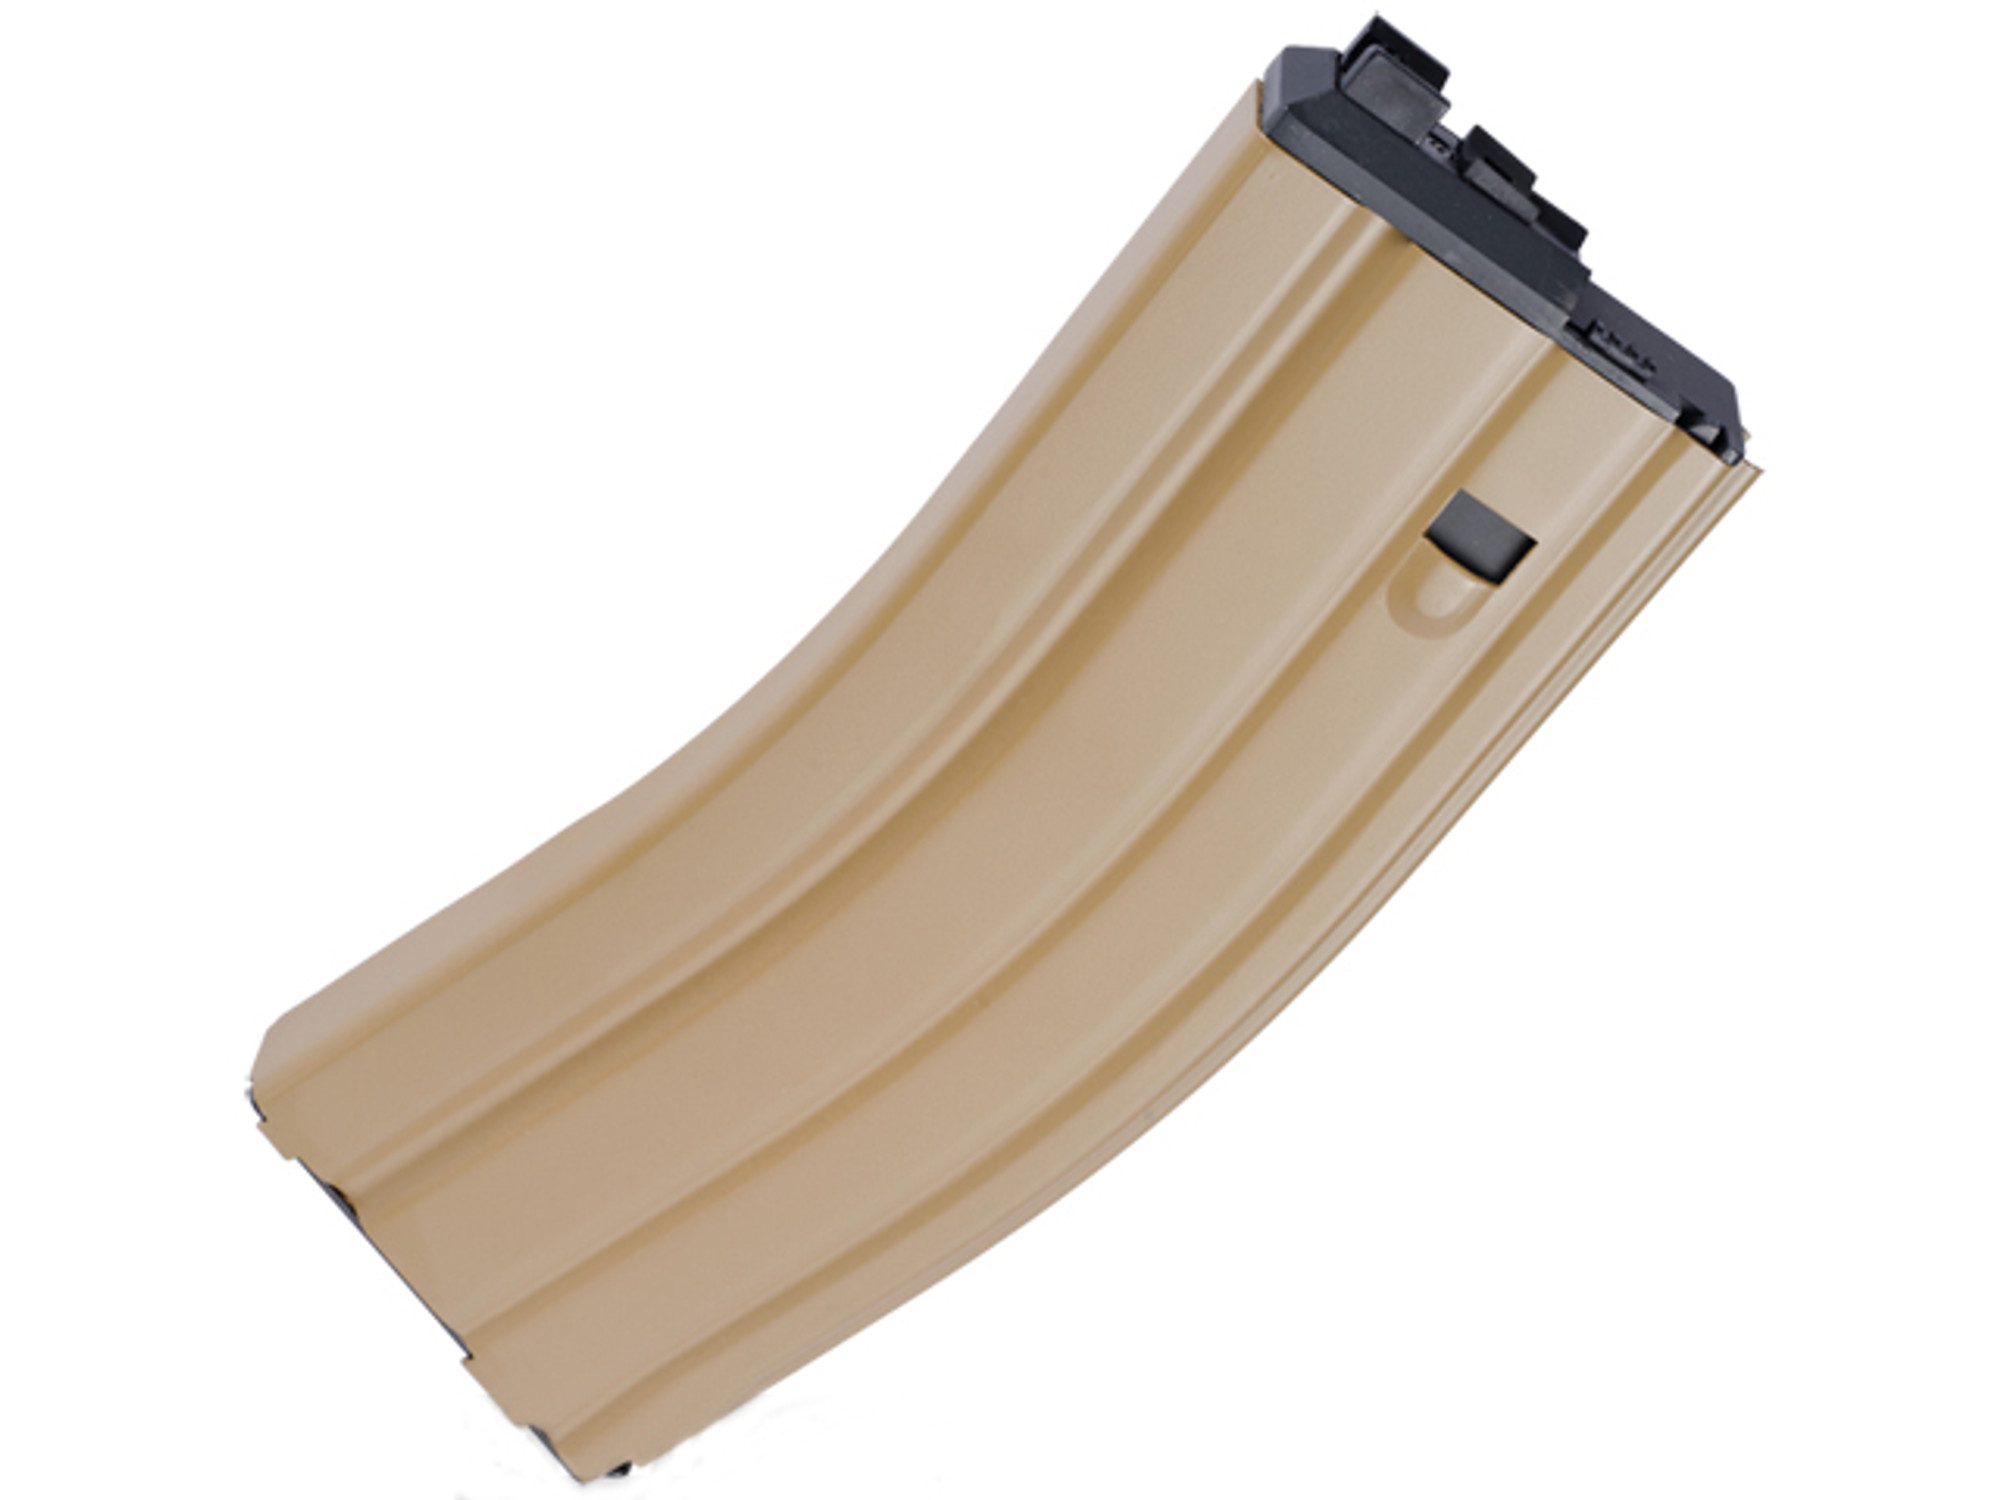 WE Spare Mag for "OPEN BOLT" WE M4 / SCAR / ASC / PDW Series Airsoft Gas Blowback Rifles (Green Gas / Tan)